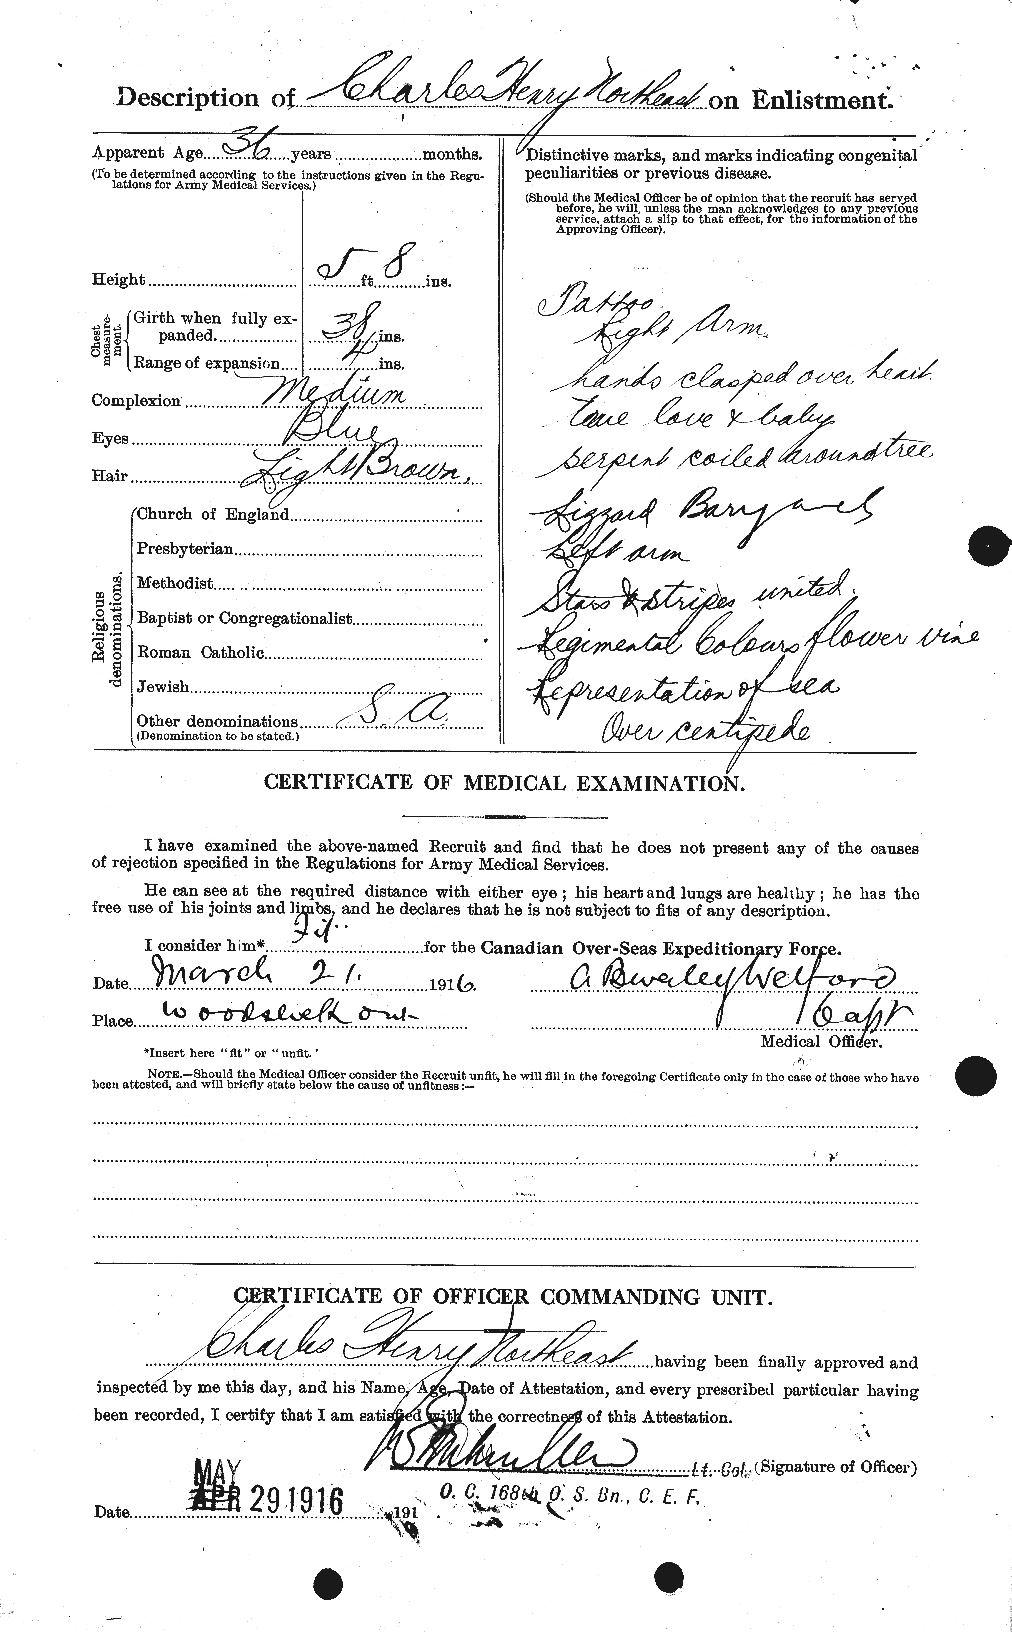 Personnel Records of the First World War - CEF 551661b